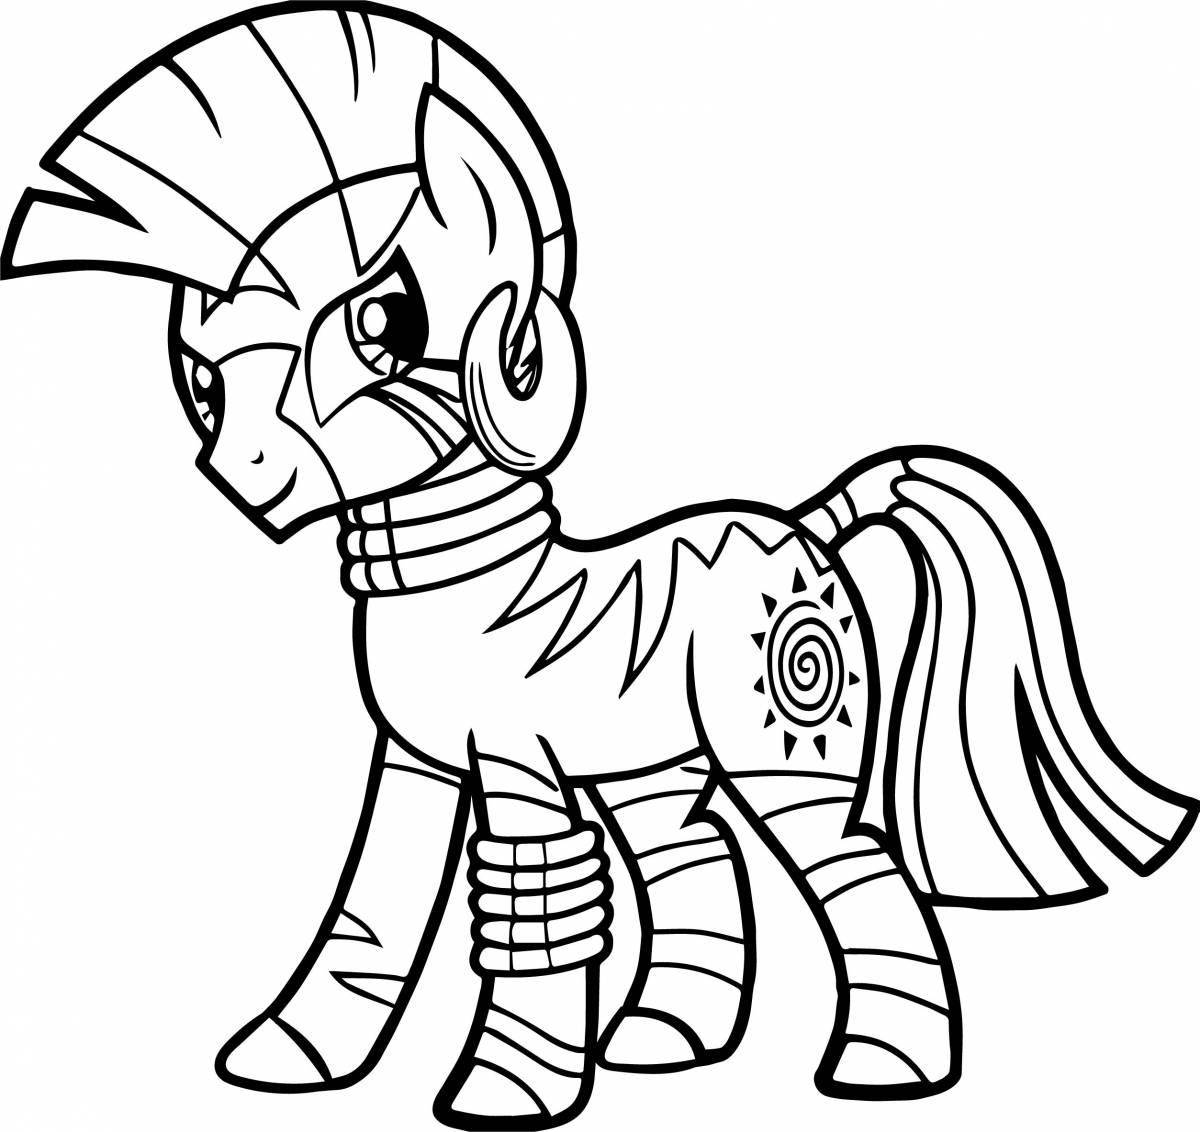 Bright pony life coloring page